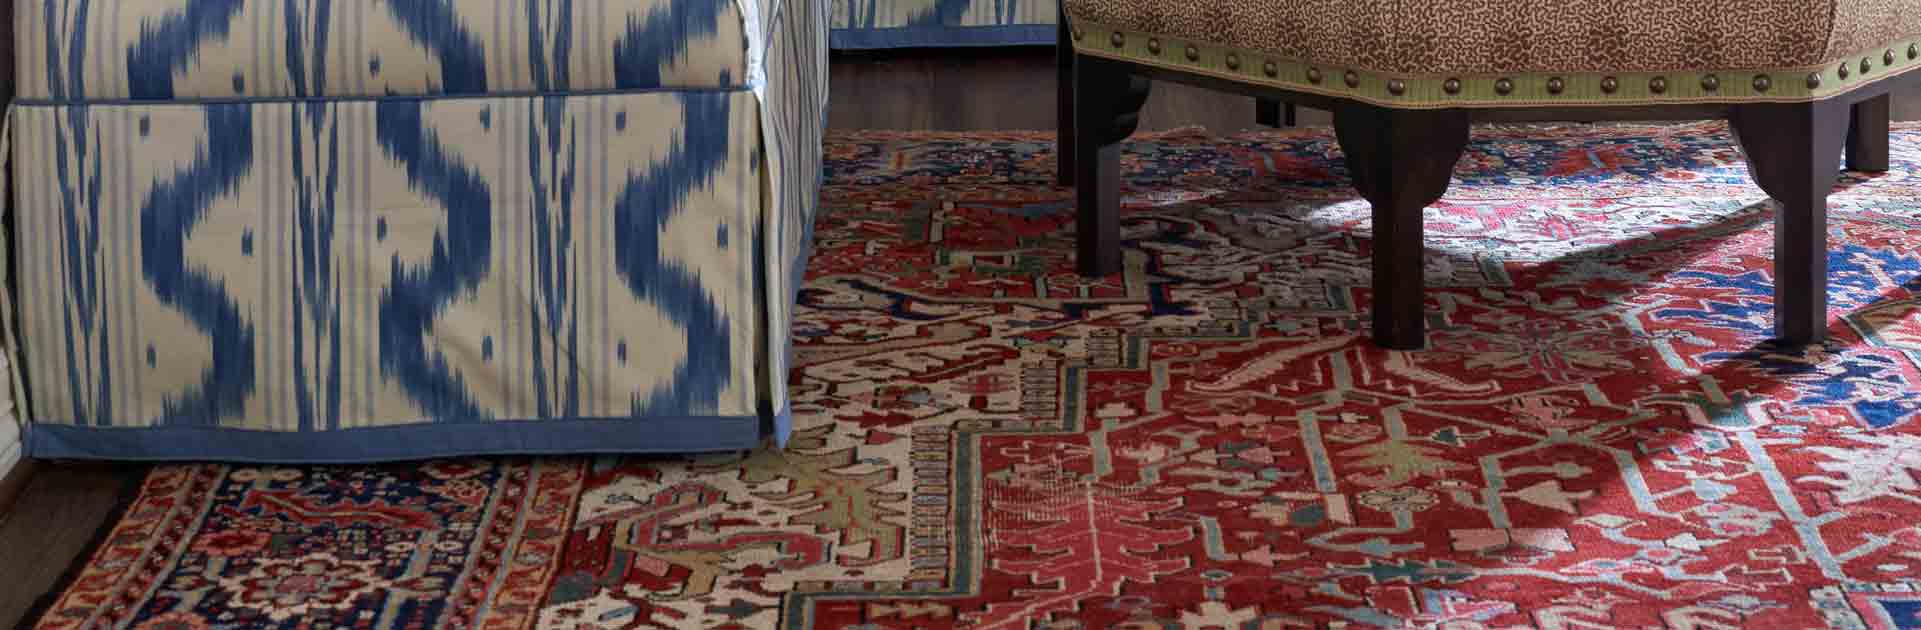 Professional Oriental Rug Cleaning in Dallas